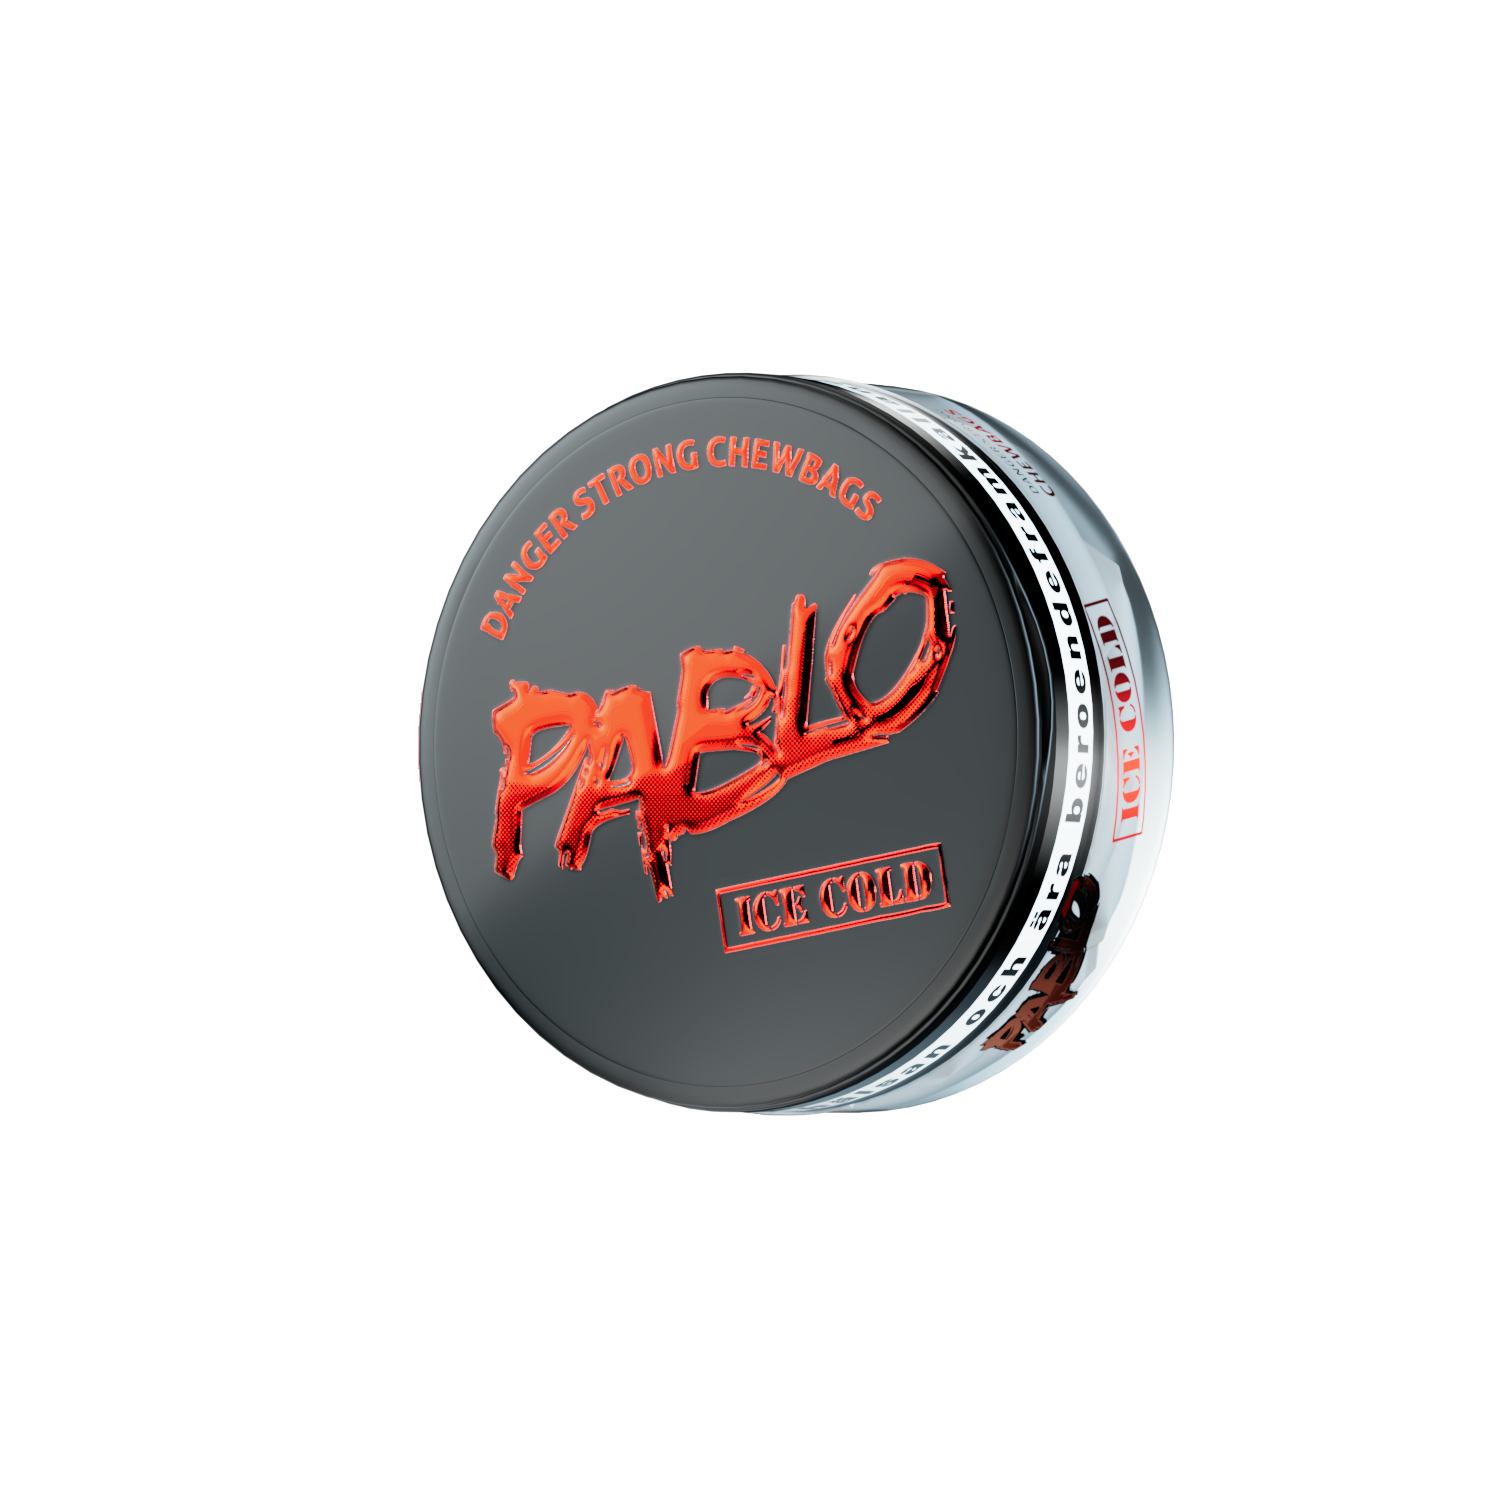 Pablo_Chewbags_IceCold_4